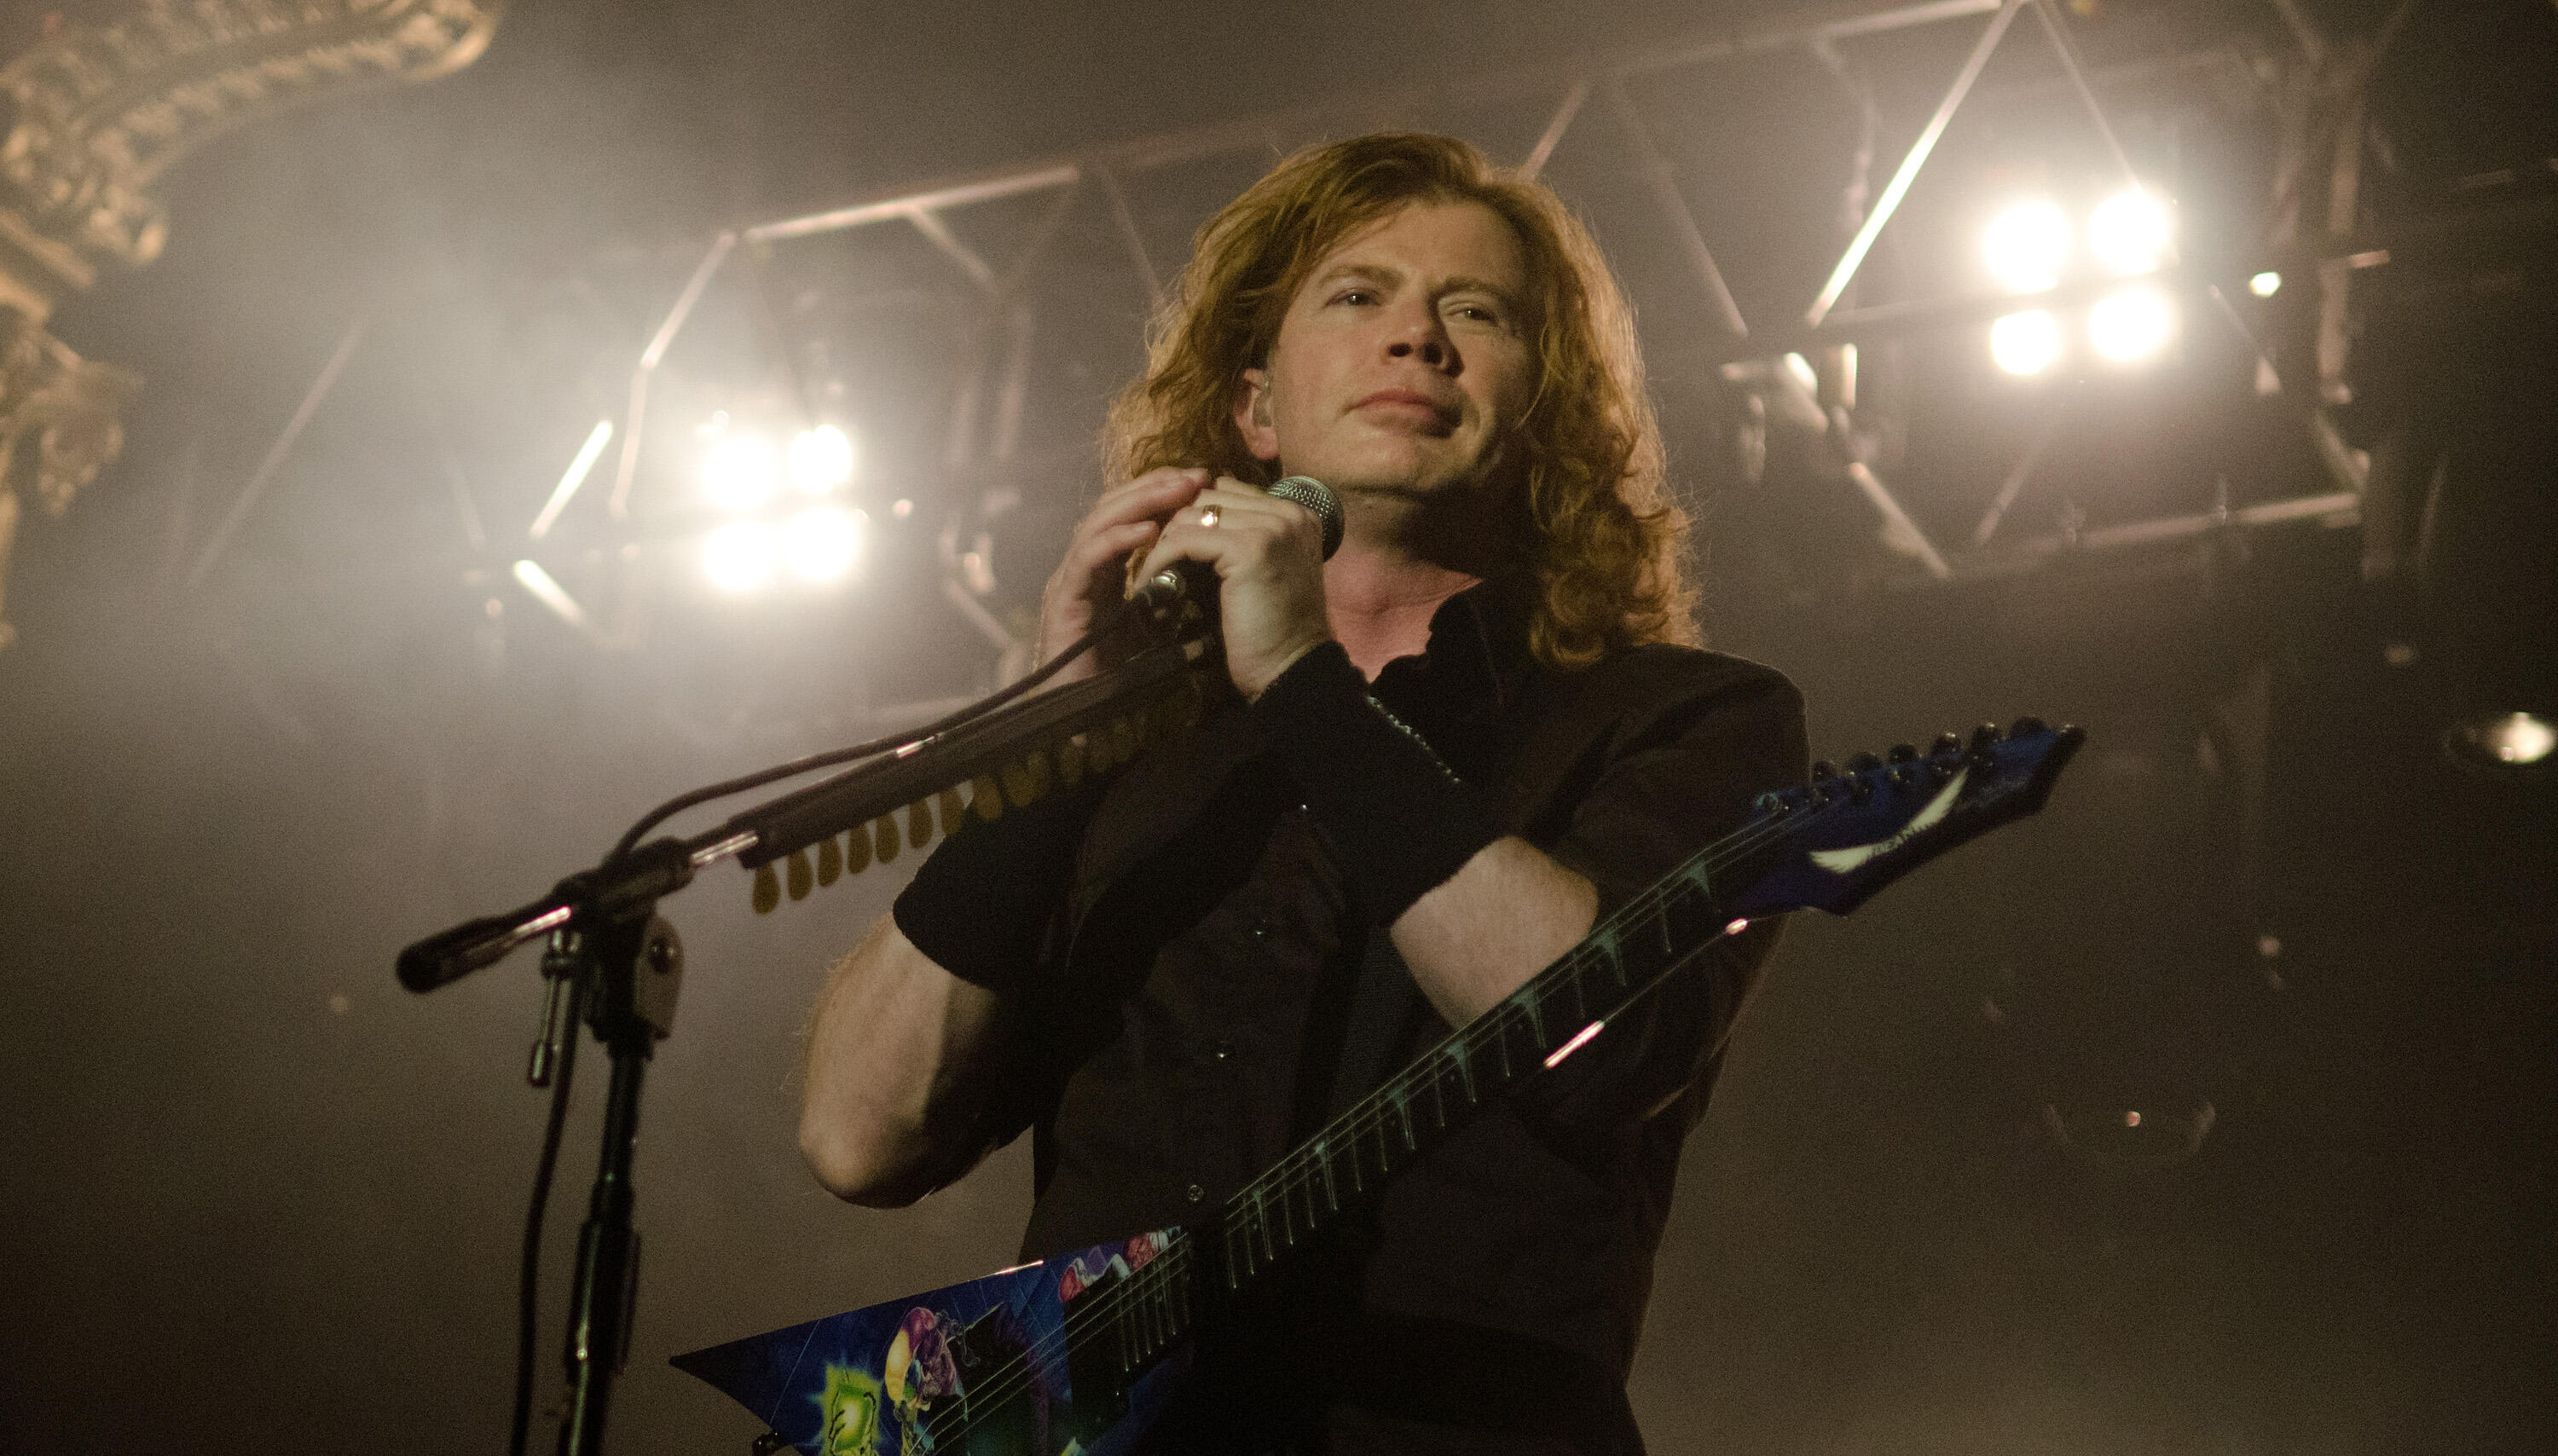 Megadeth's Dave Mustaine Announces He's "100 Percent Free Of Cancer" - Thumbnail Image